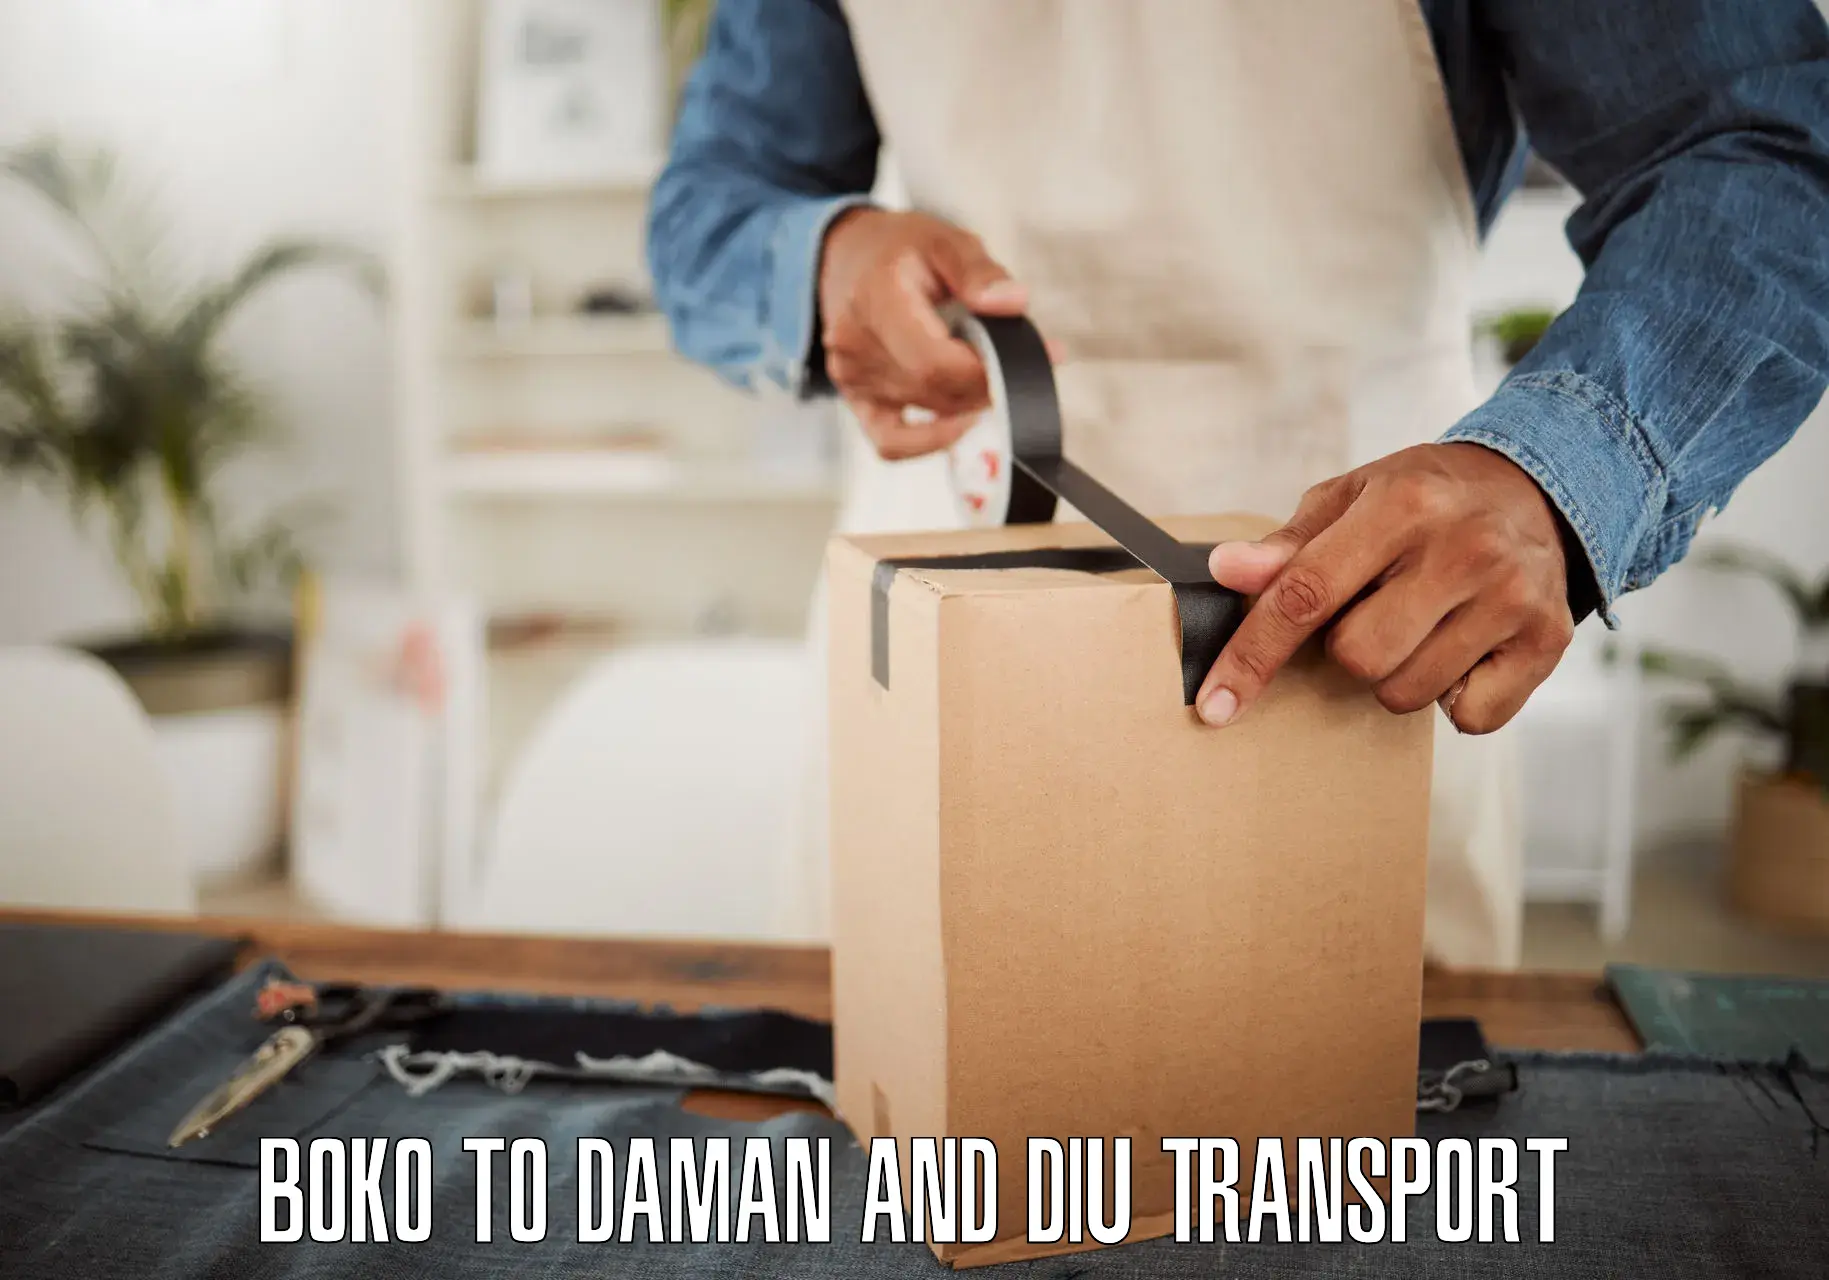 Goods delivery service Boko to Daman and Diu